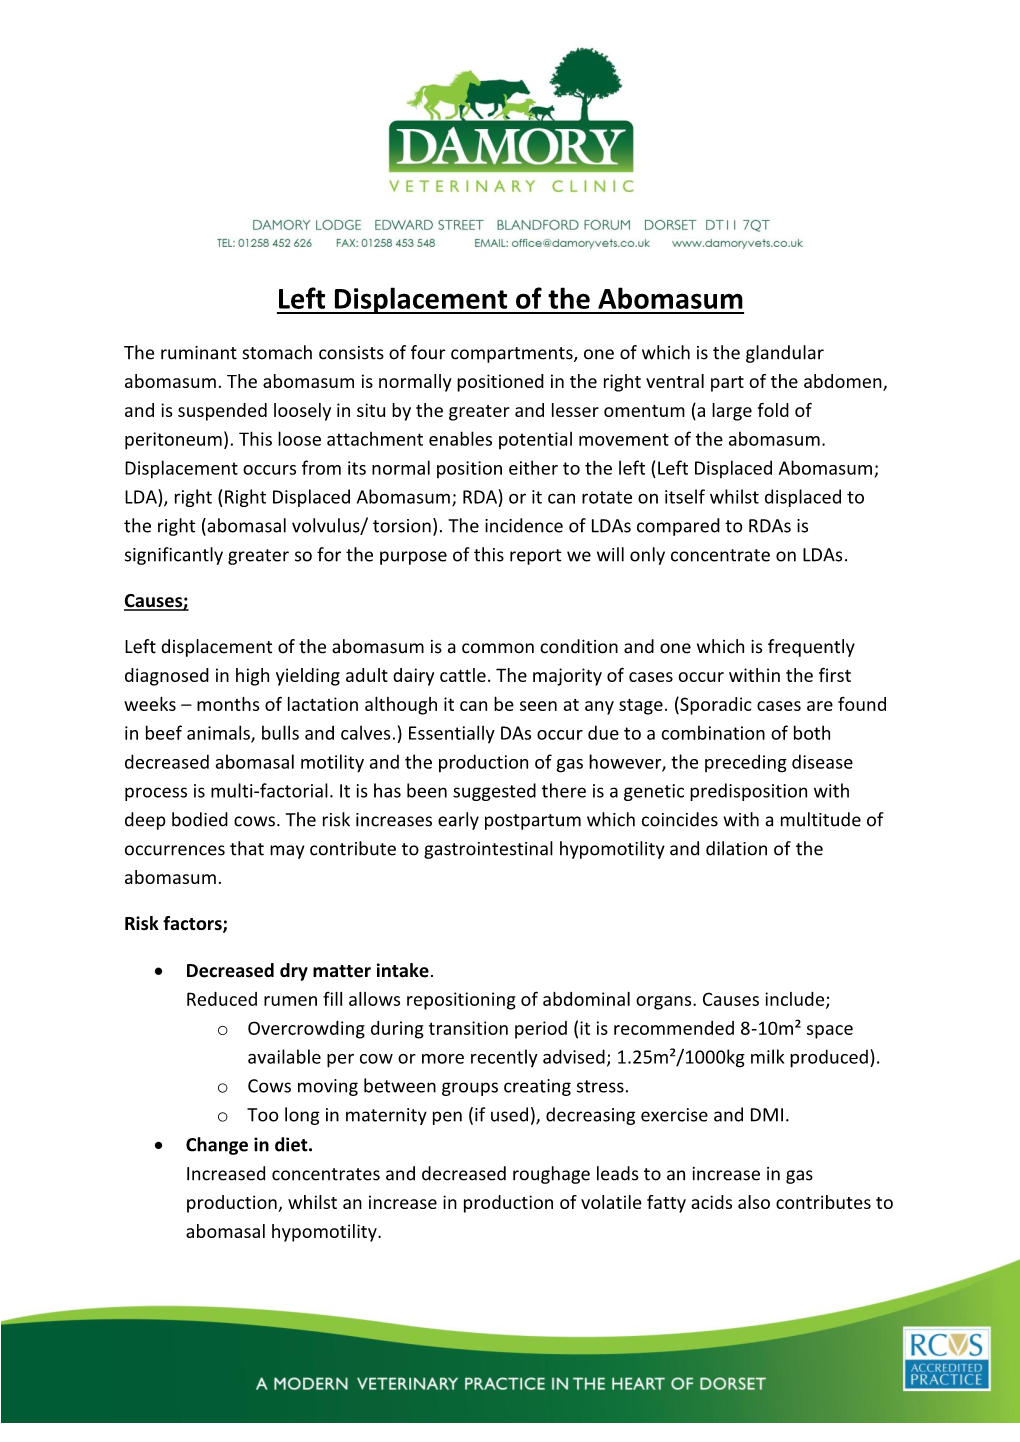 Left Displacement of the Abomasum